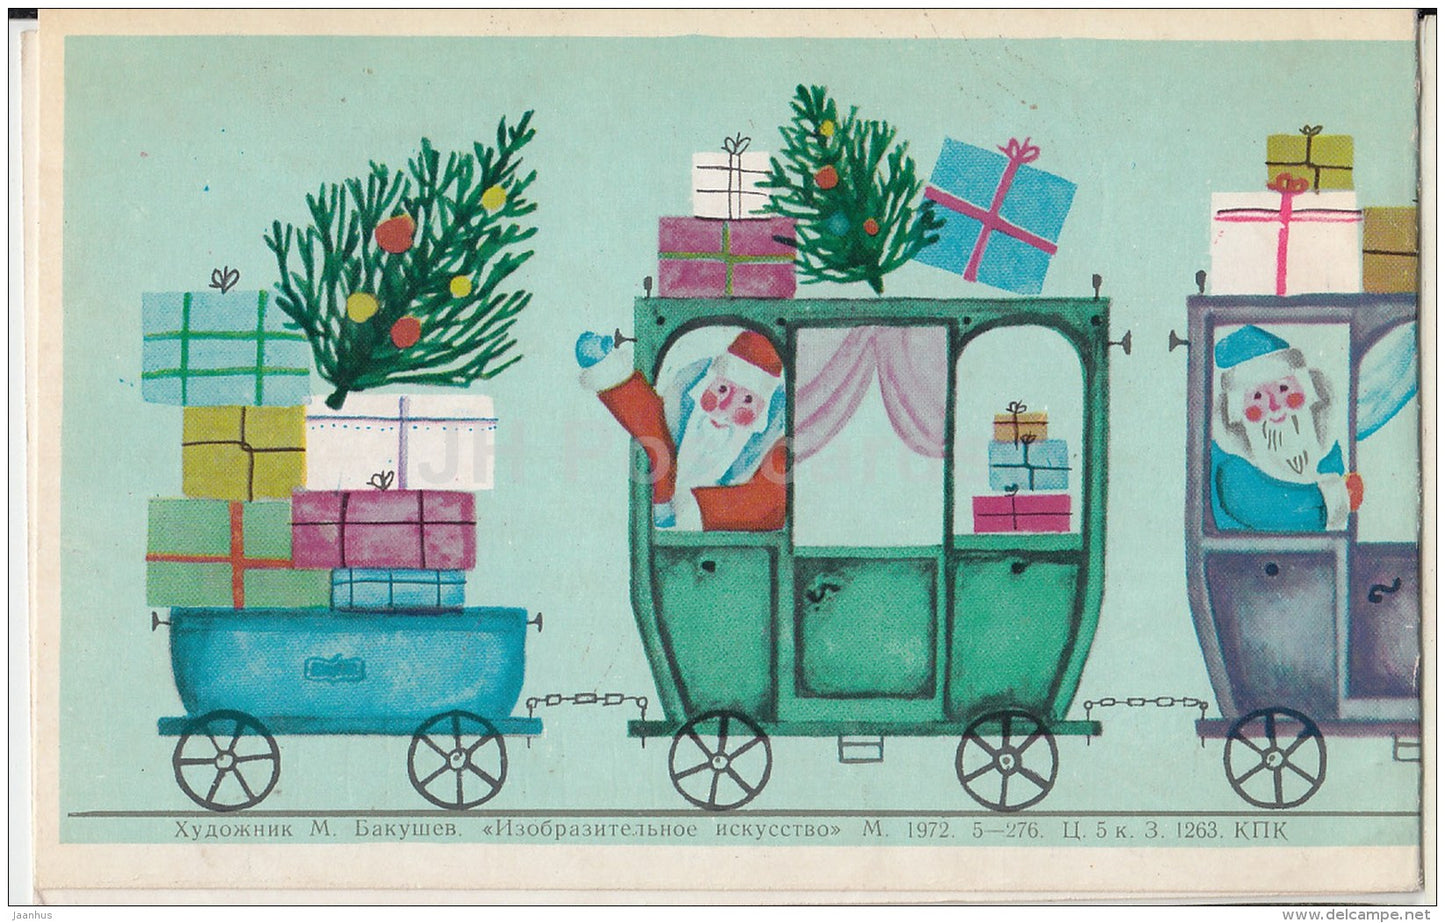 New Year Greeting Card by M. Bakushev - Train - Santa Claus - Gifts - illustration - 1972 - Russia USSR - used - JH Postcards